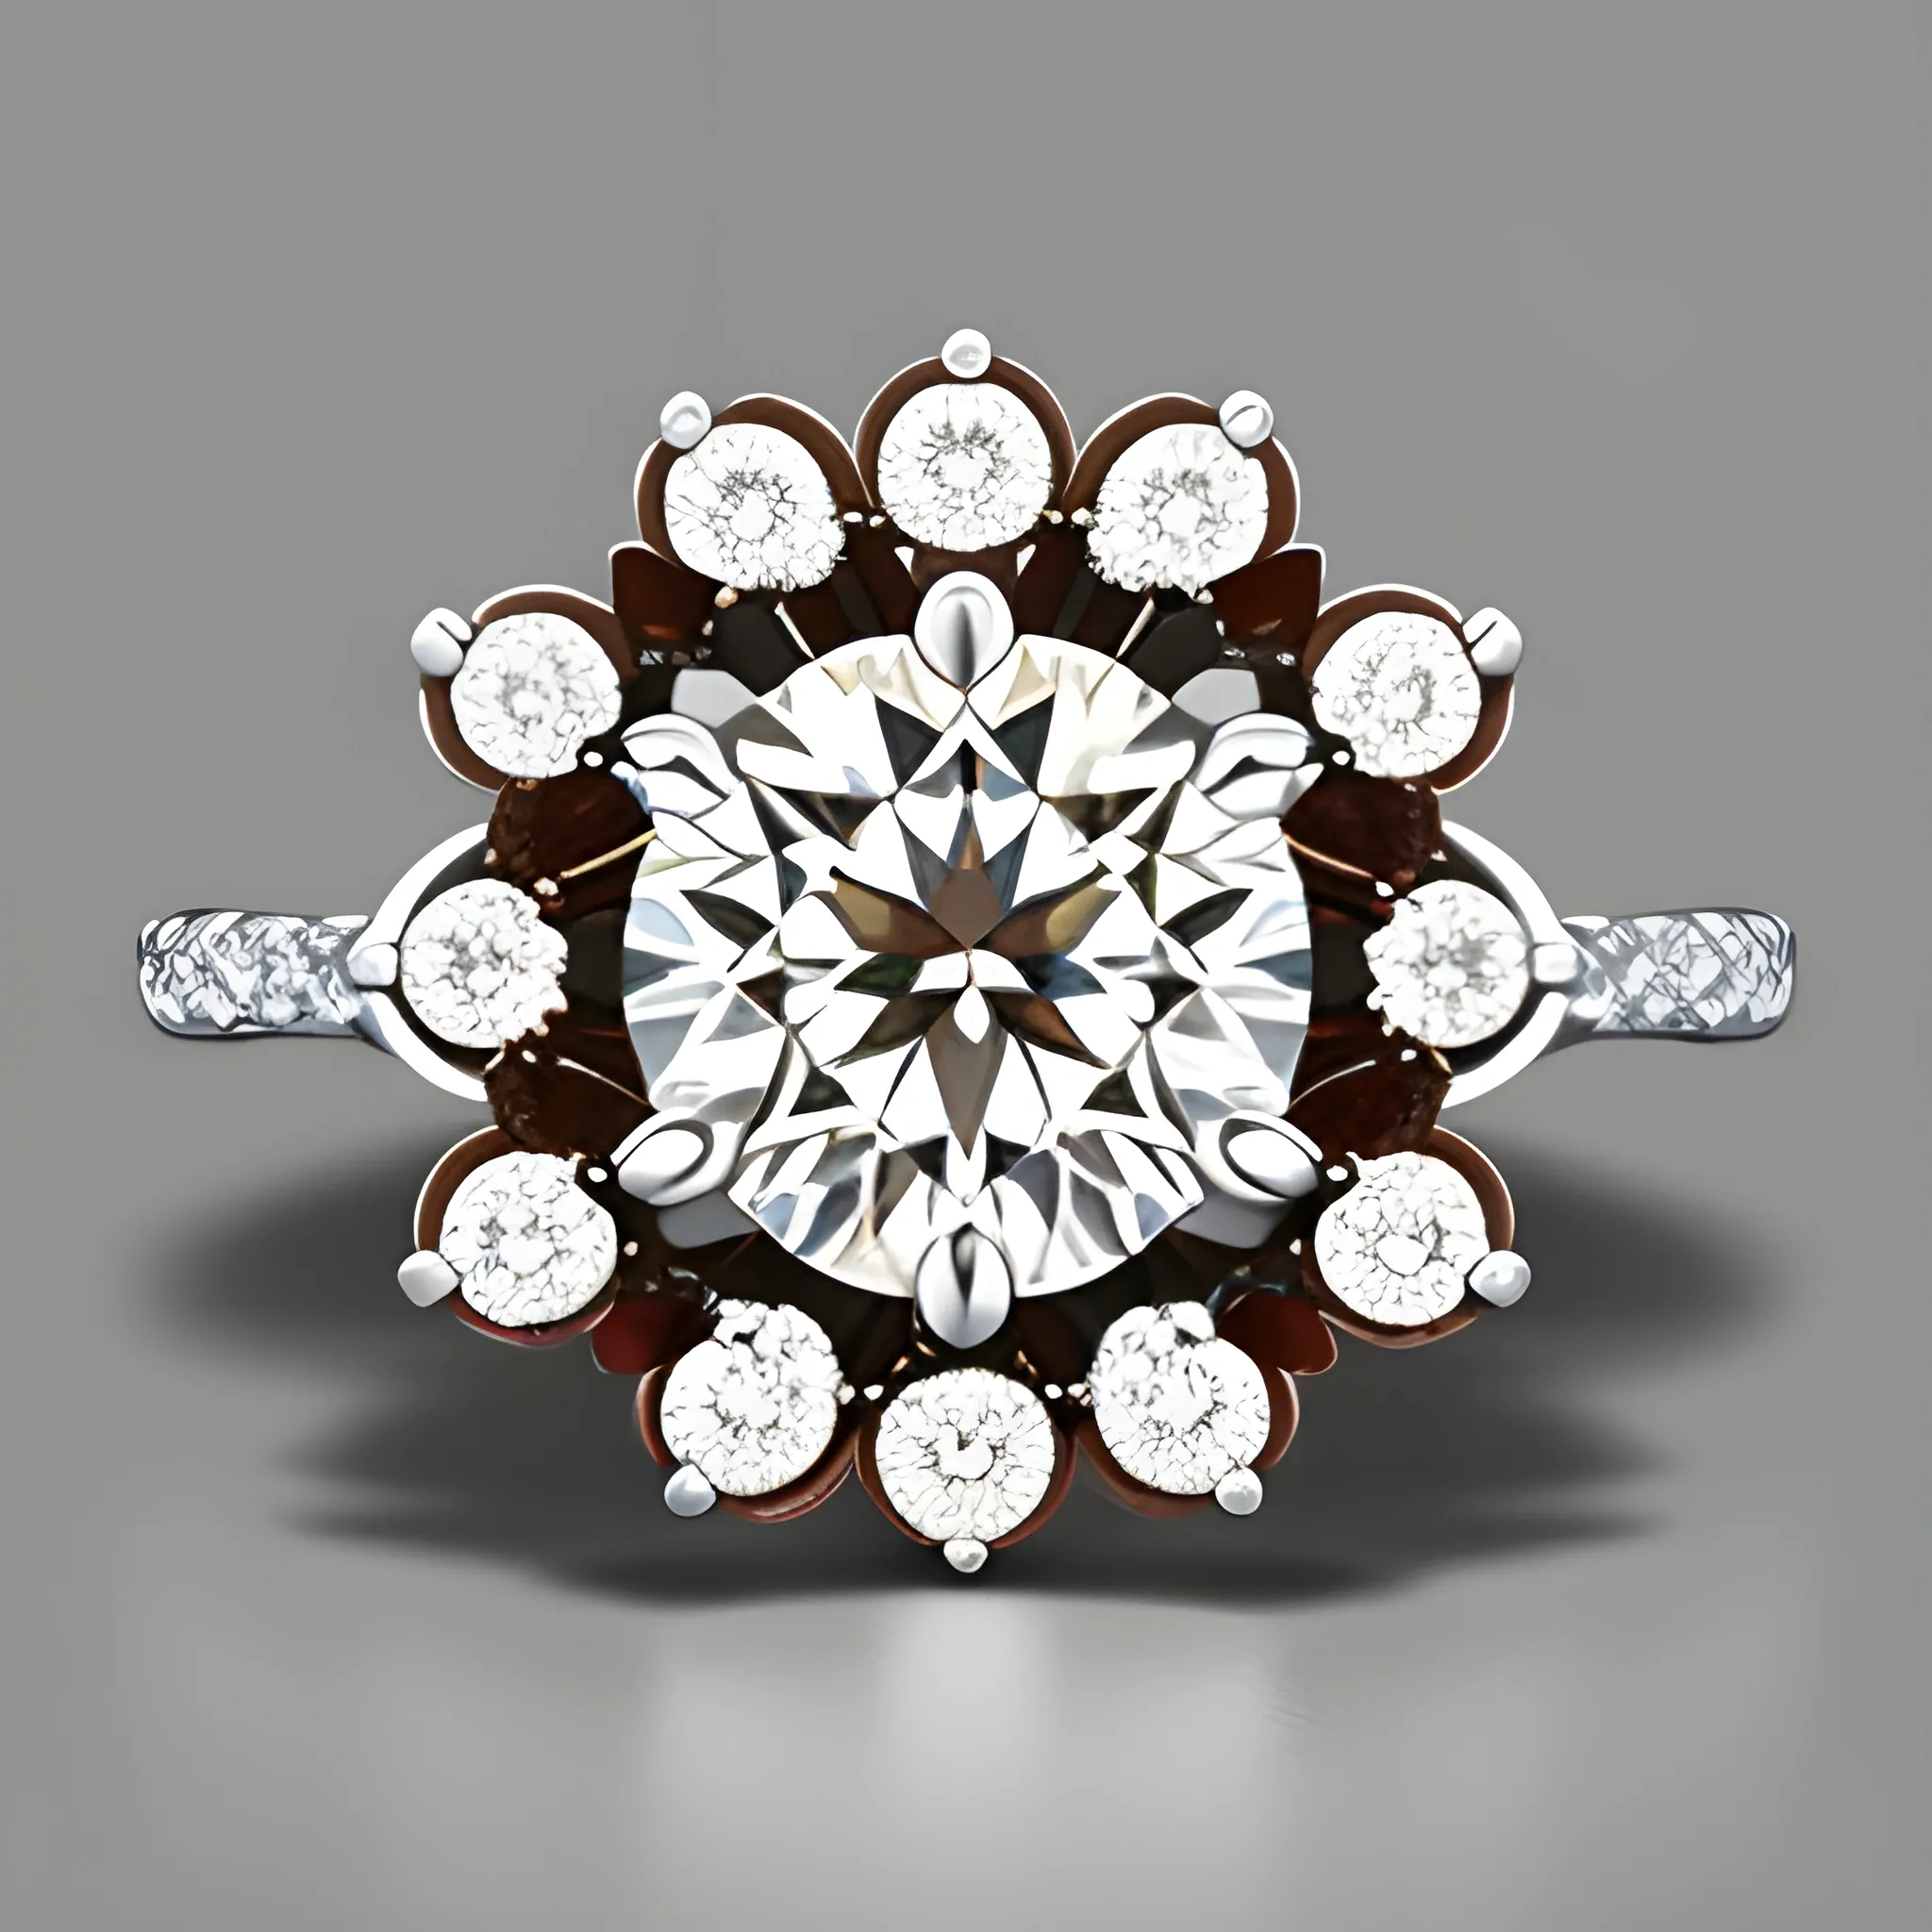 , Pencil Sketch Create a flower-shaped ring with a central white half-carat diamond surrounded by 6 drop-shaped diamonds in  shades of brown, fitting around the central brilliant
